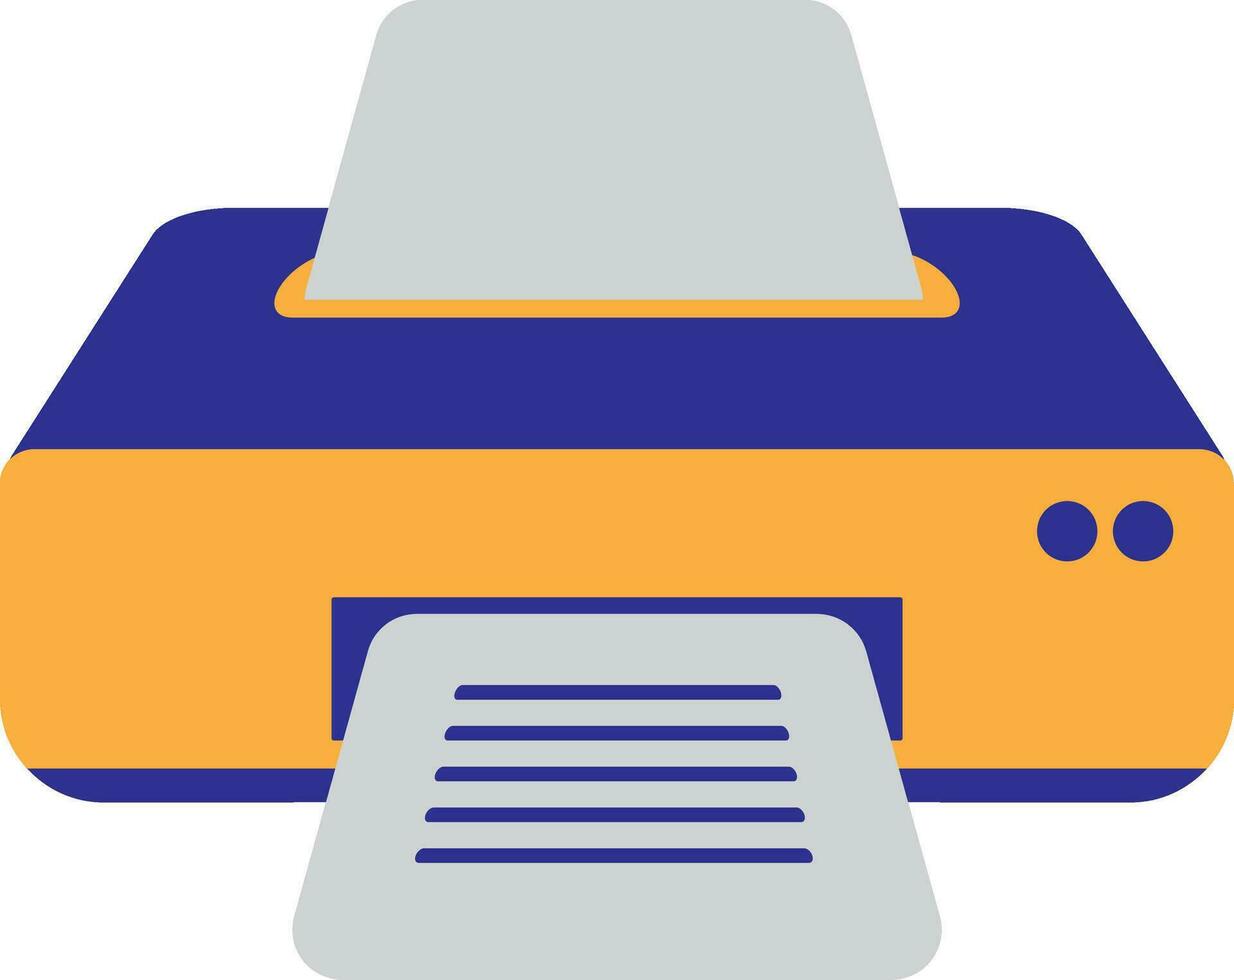 Printer machine with paper in icon for office work. vector